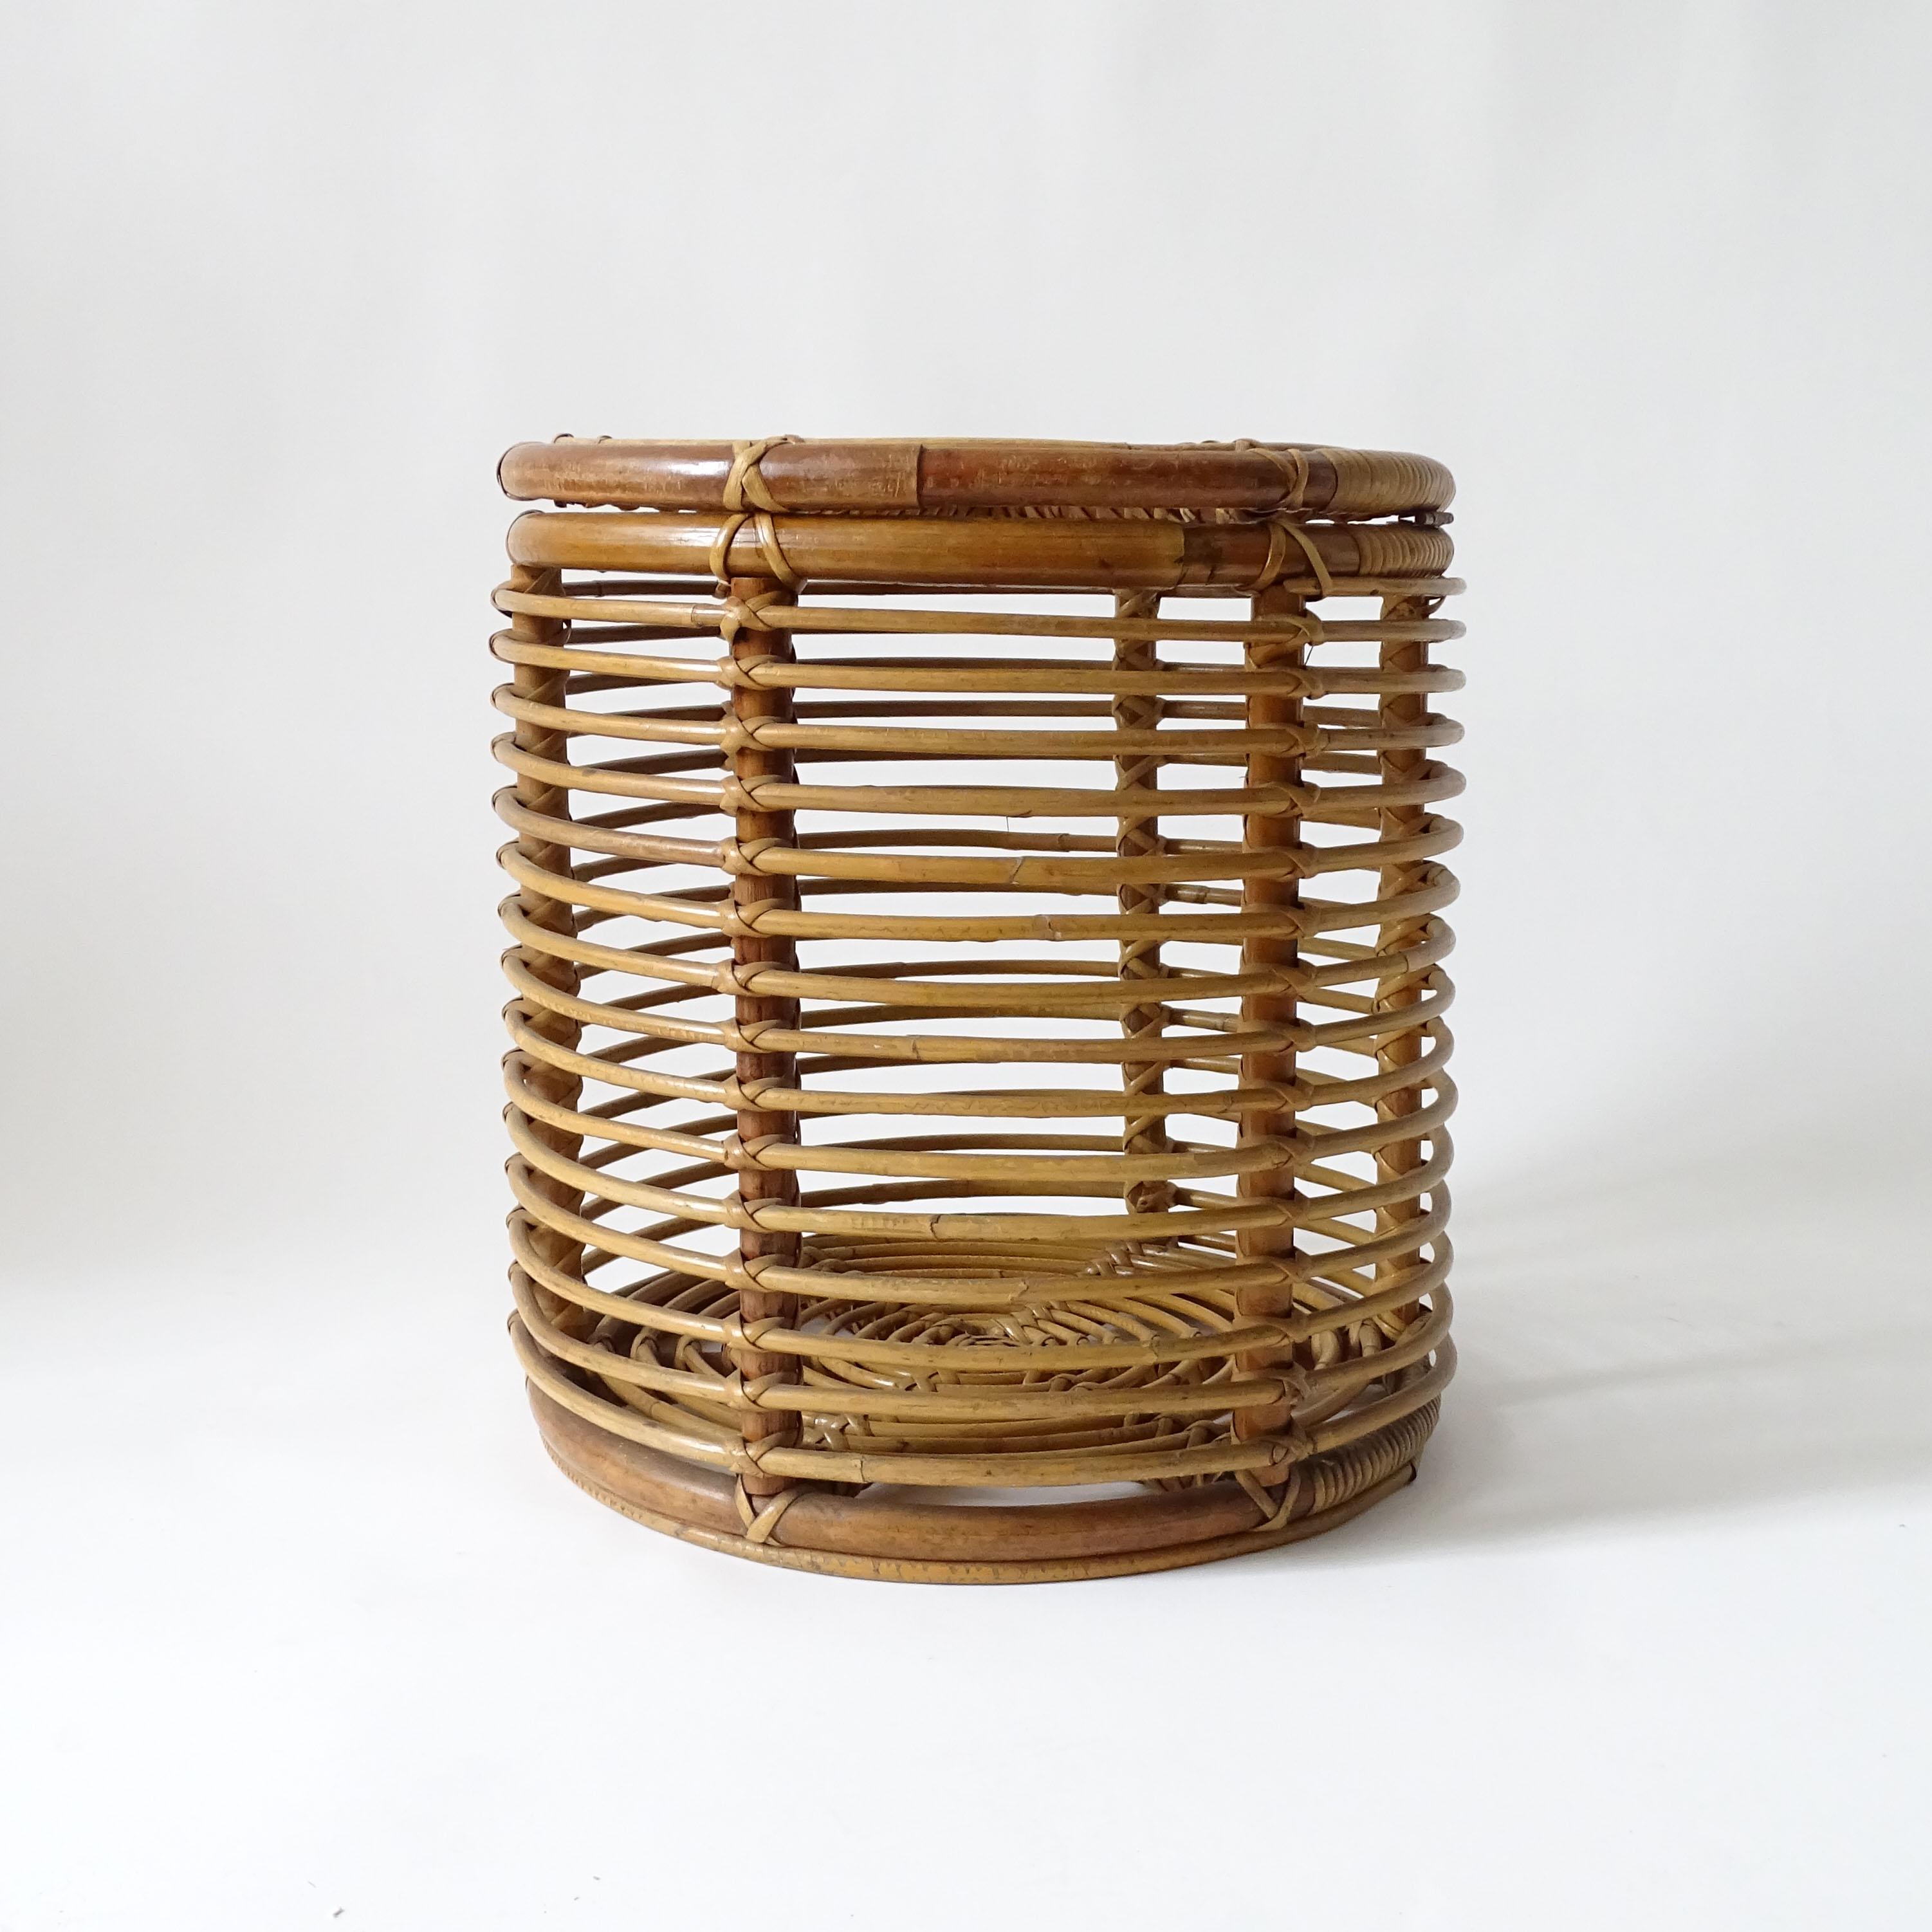 Italian 1950s Wicker and Bamboo Basket with Lid.